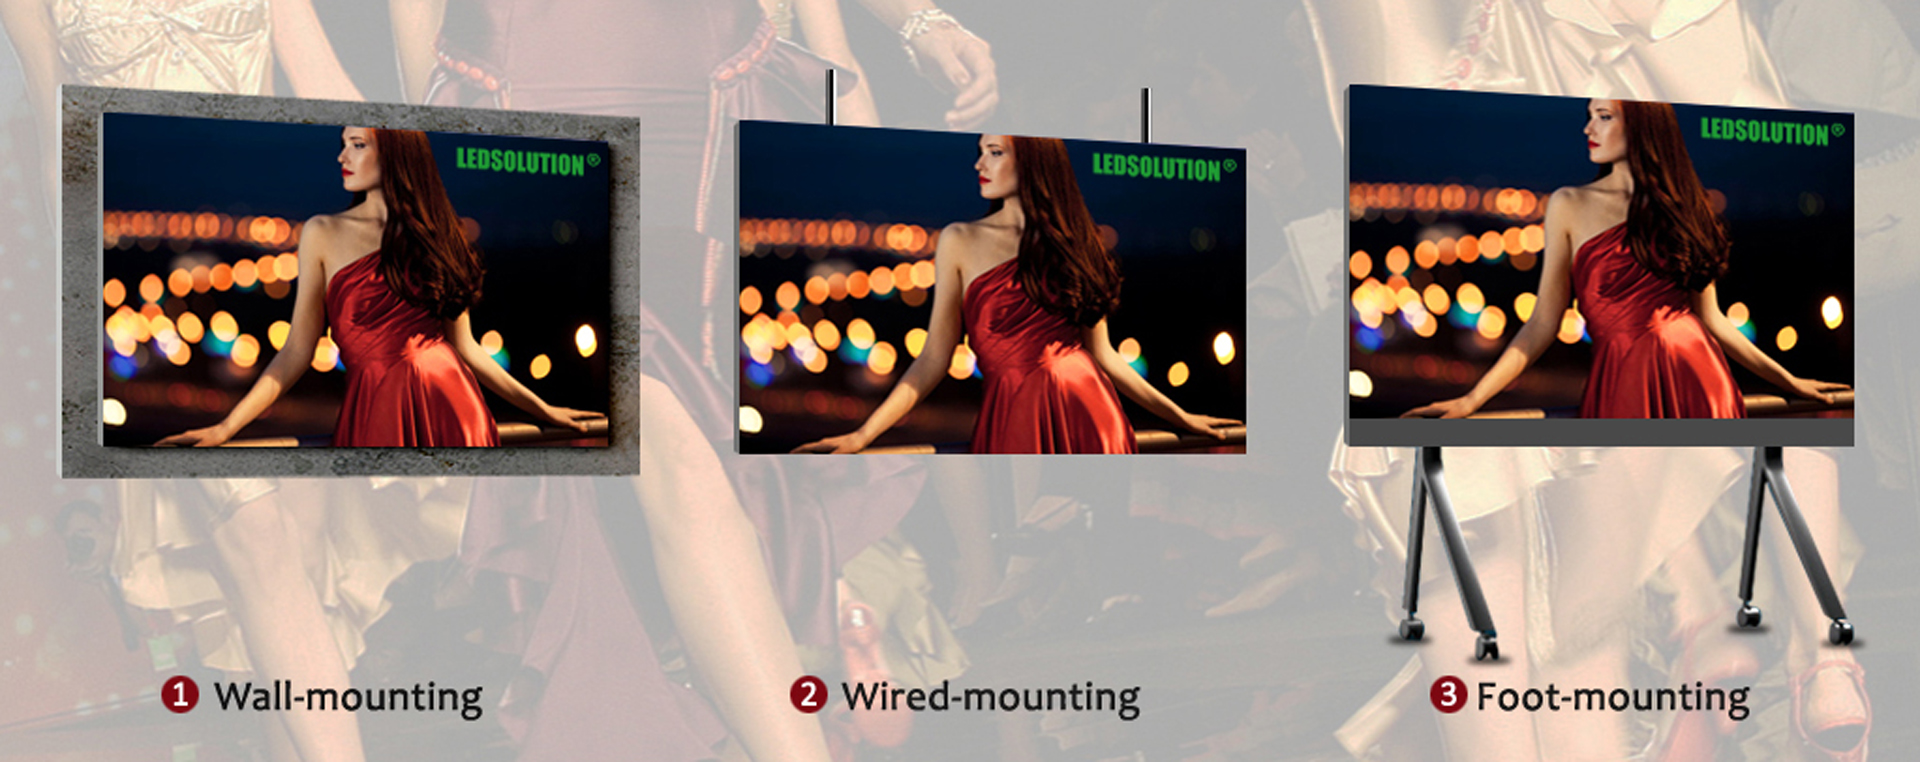 Pro95 Series LED Display Wall mounting / Wired mounting / Foot mounting